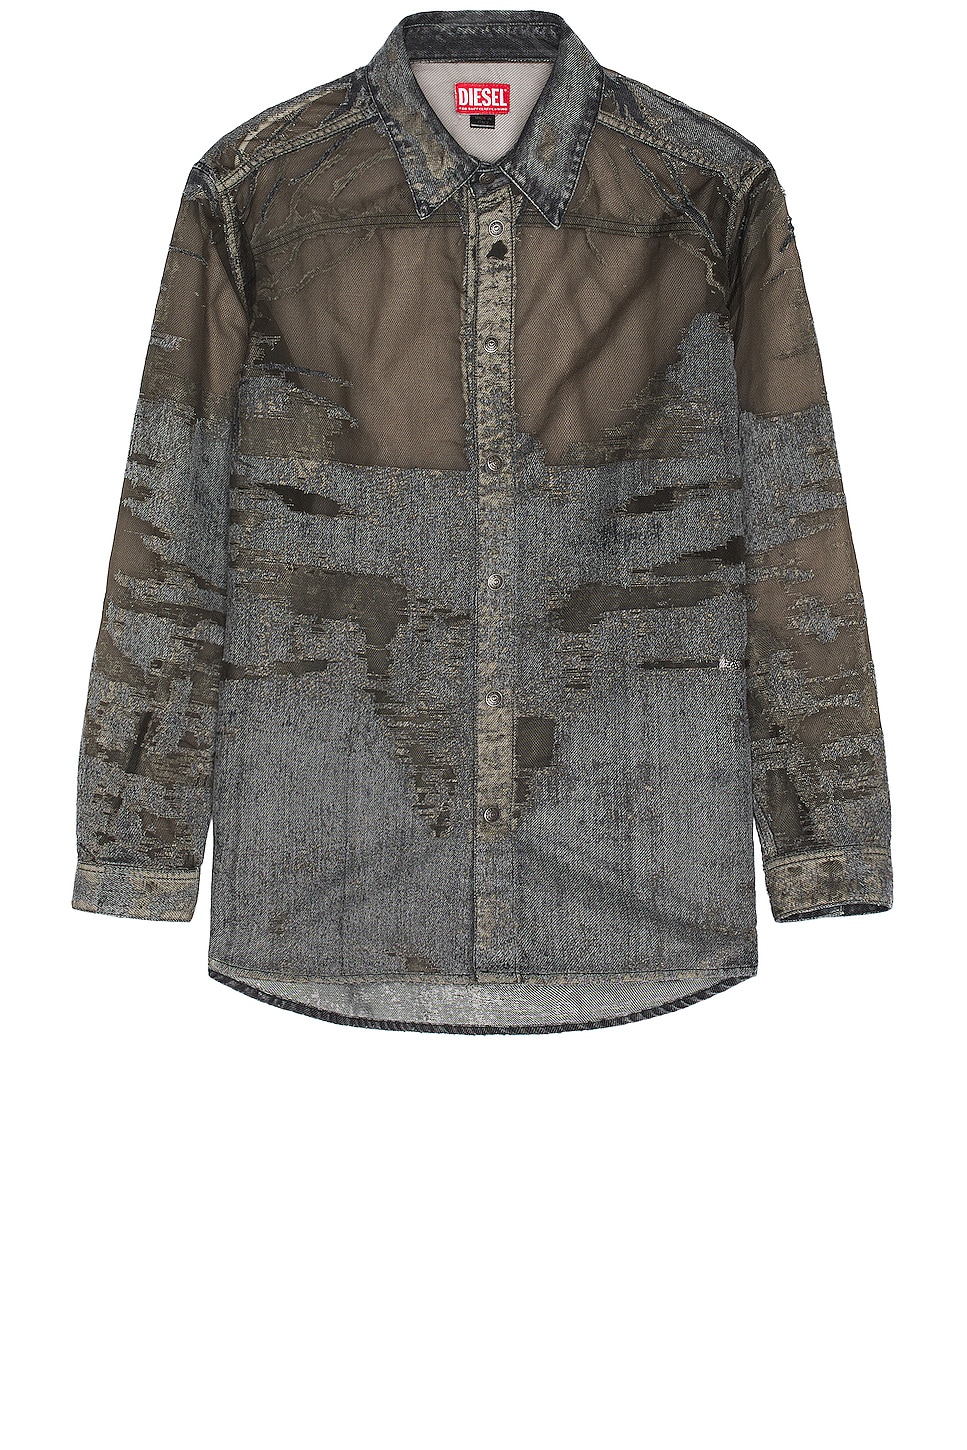 Image 1 of Diesel Simply Over Denim Button Down Shirt in Grey